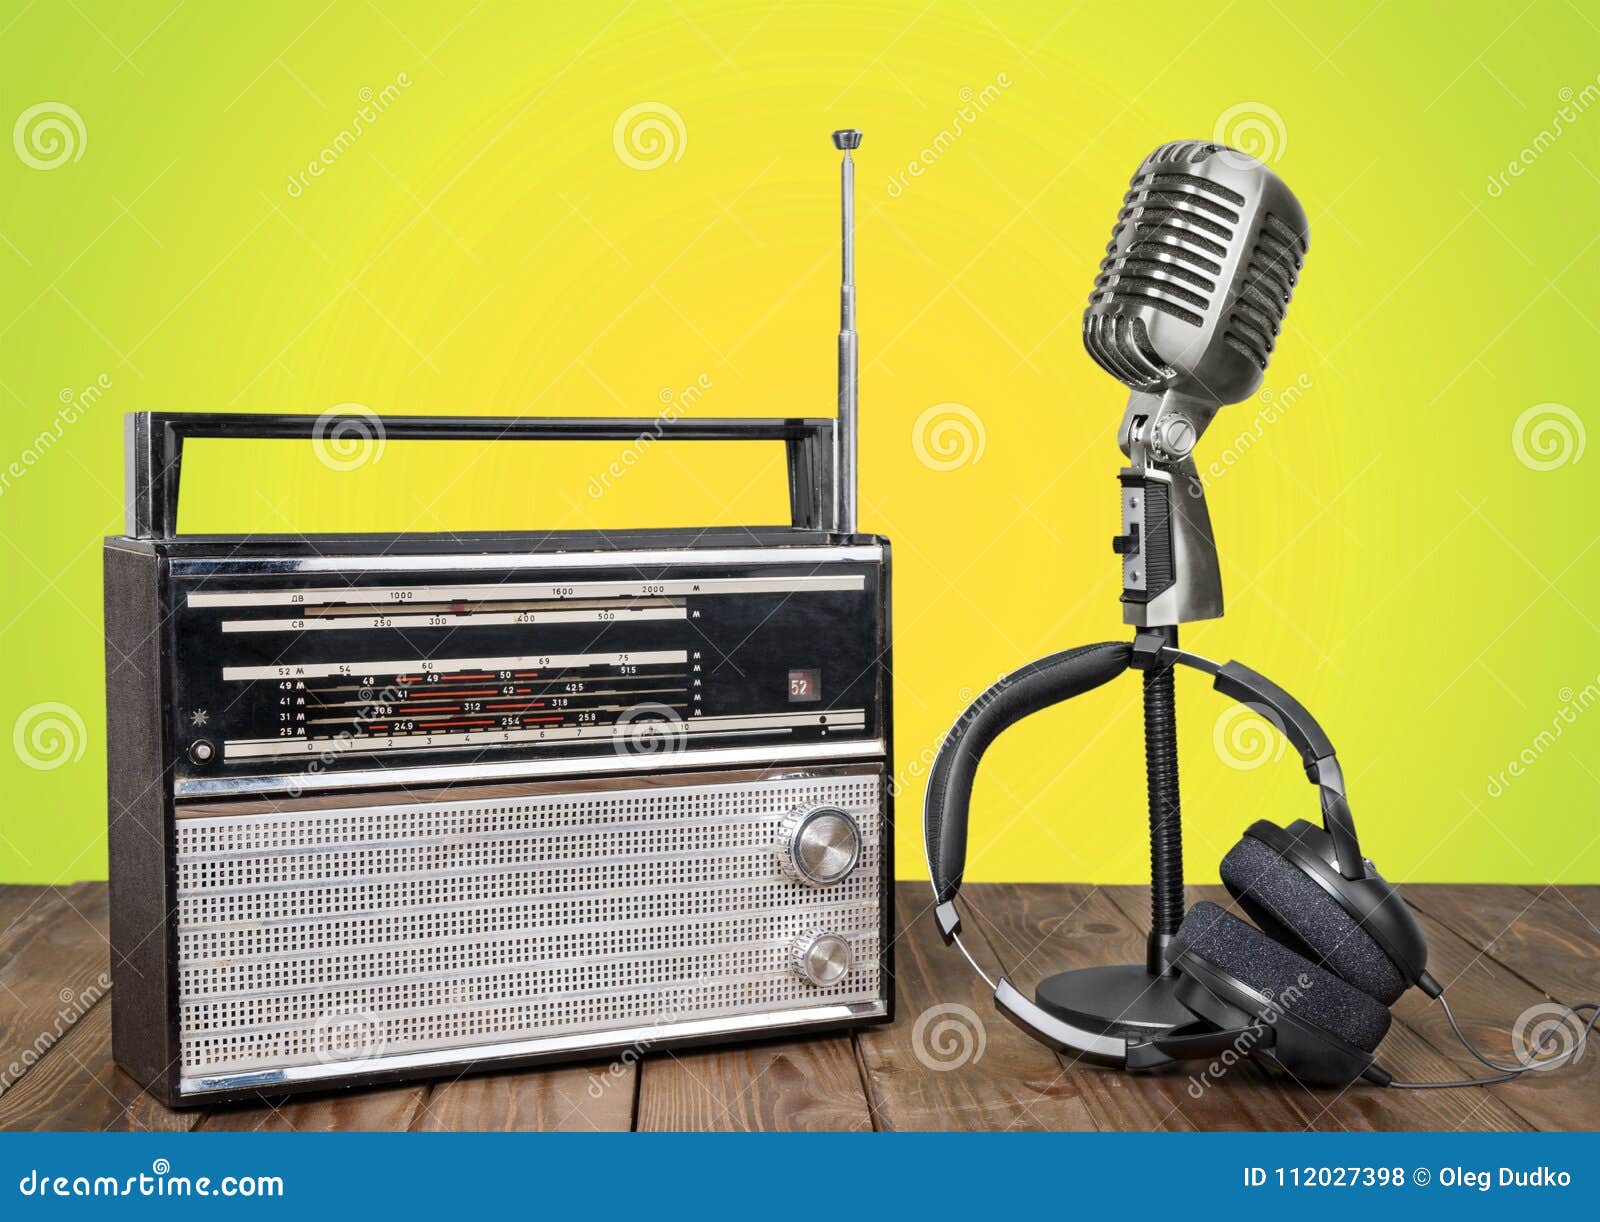 Constitute safety somersault Microphone, Radio and Headphones on Wooden Table Editorial Stock Photo -  Image of classic, vintage: 112027398